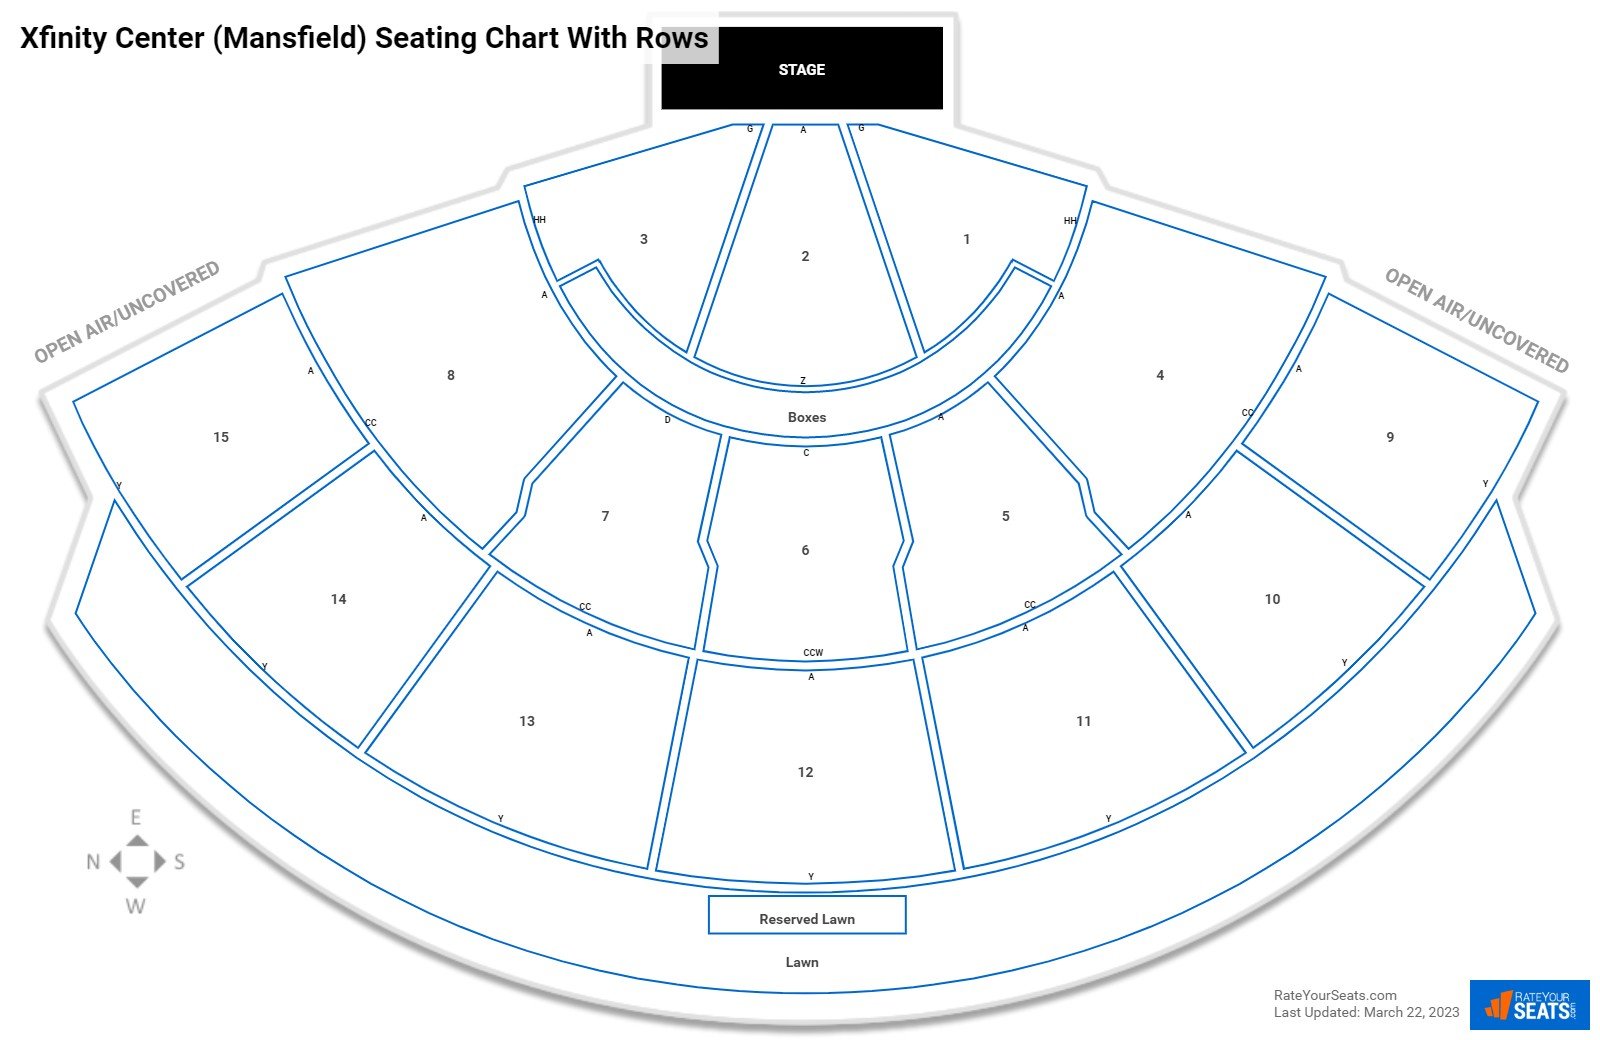 Xfinity Center (Mansfield) seating chart with row numbers